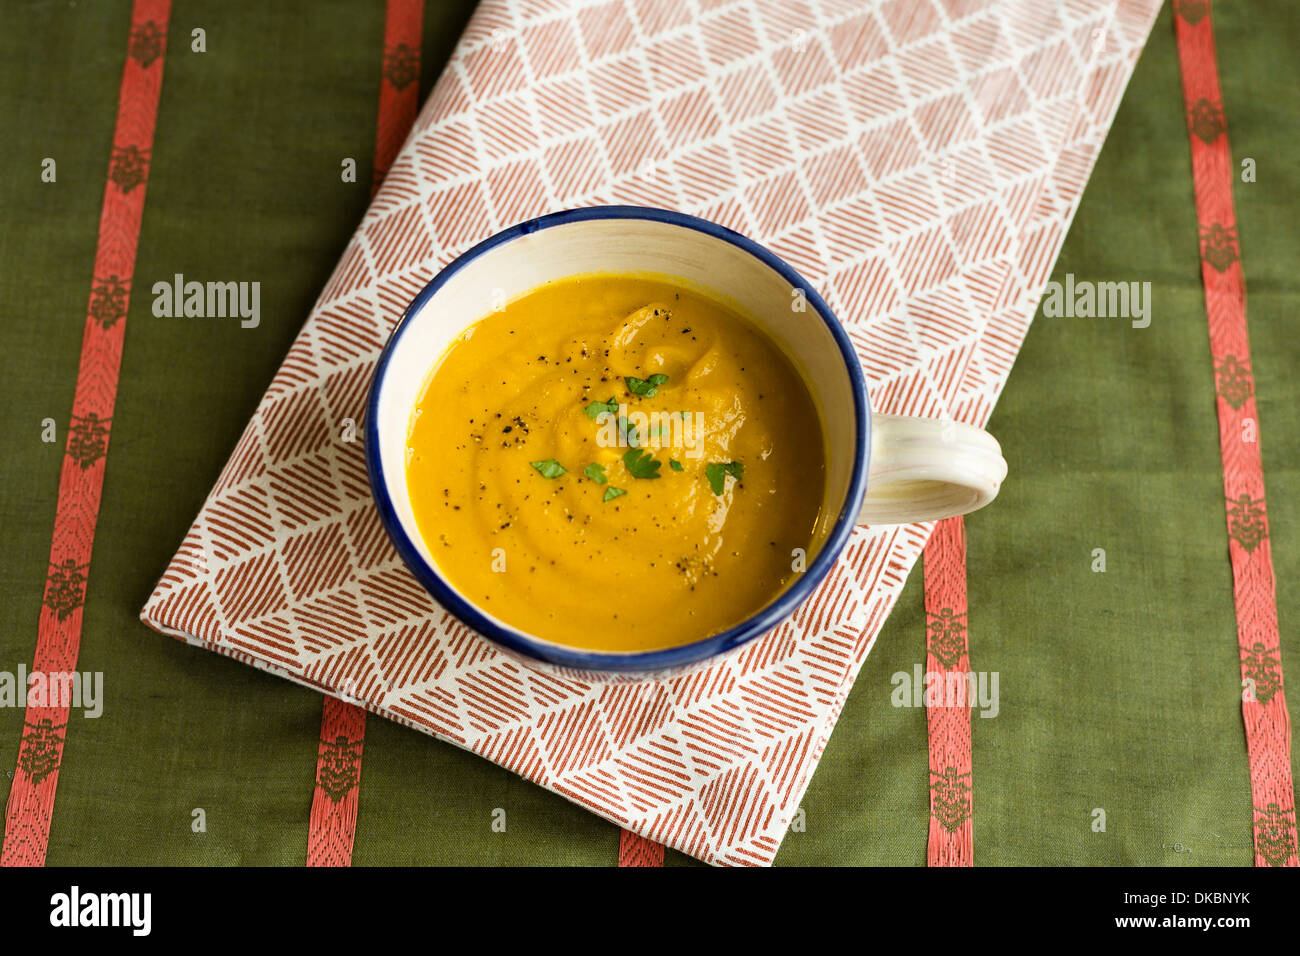 Simple view of winter vegetable carrot and coriander soup, in large mug. Stock Photo